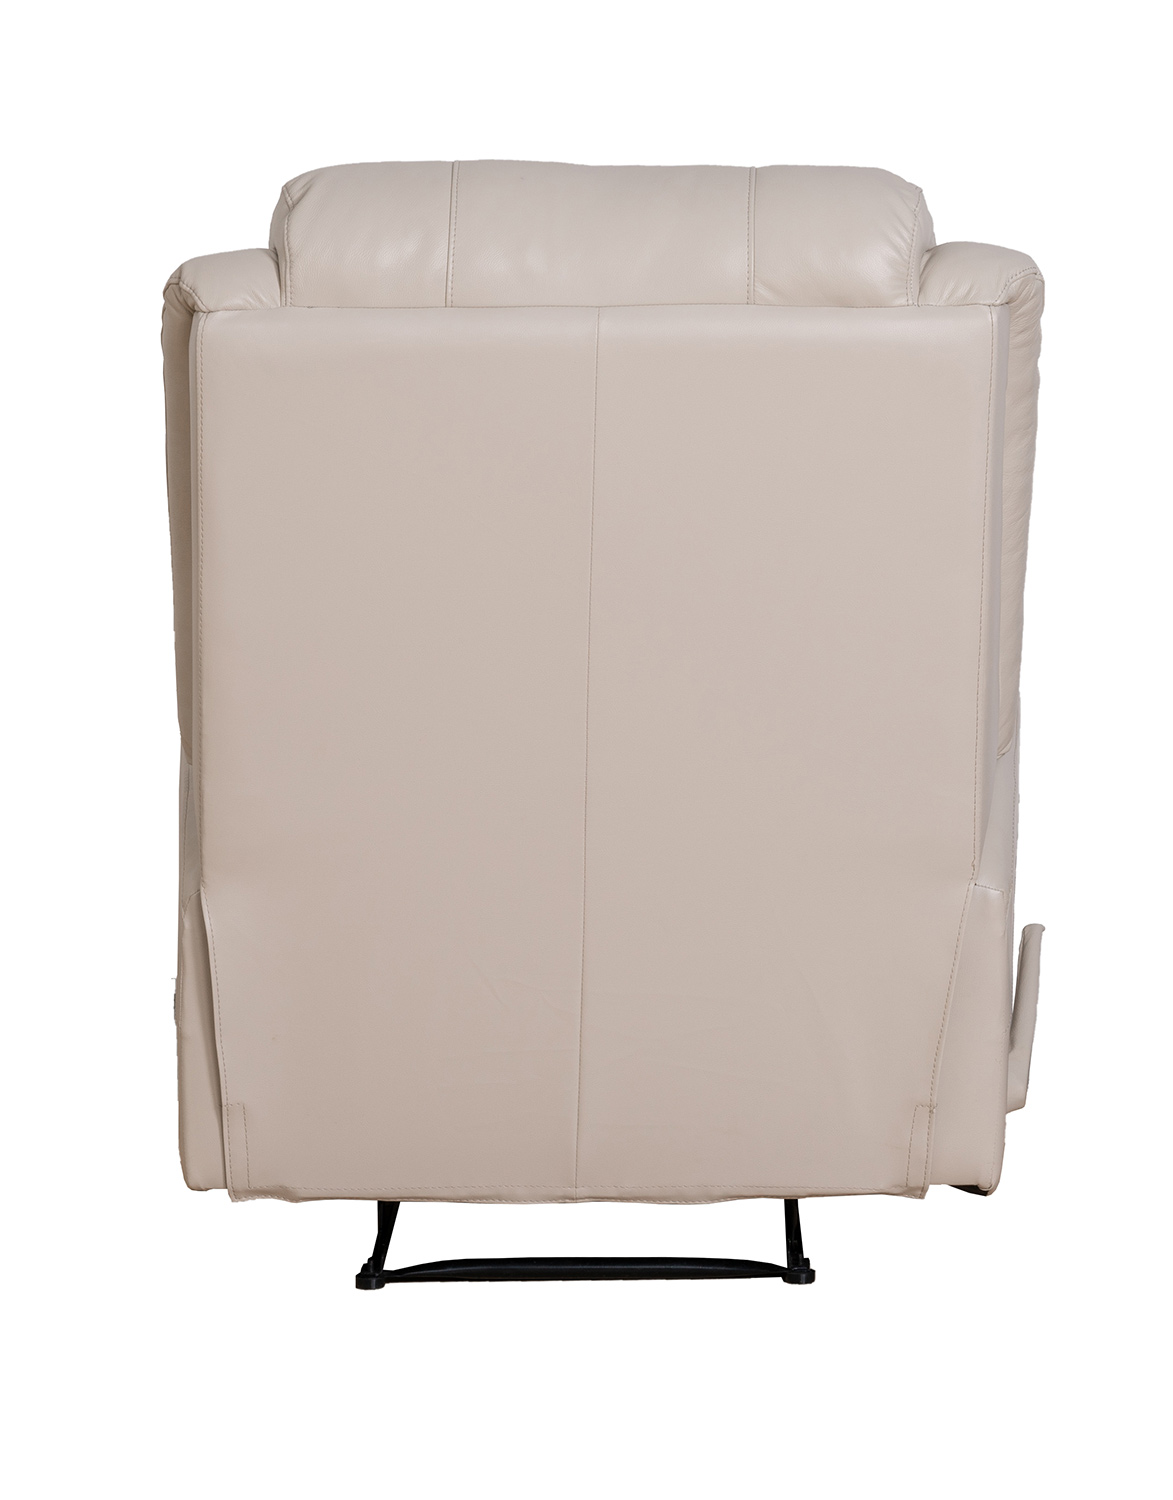 Barcalounger Bradley Big and Tall Recliner Chair - Lux Cream/Leather Match